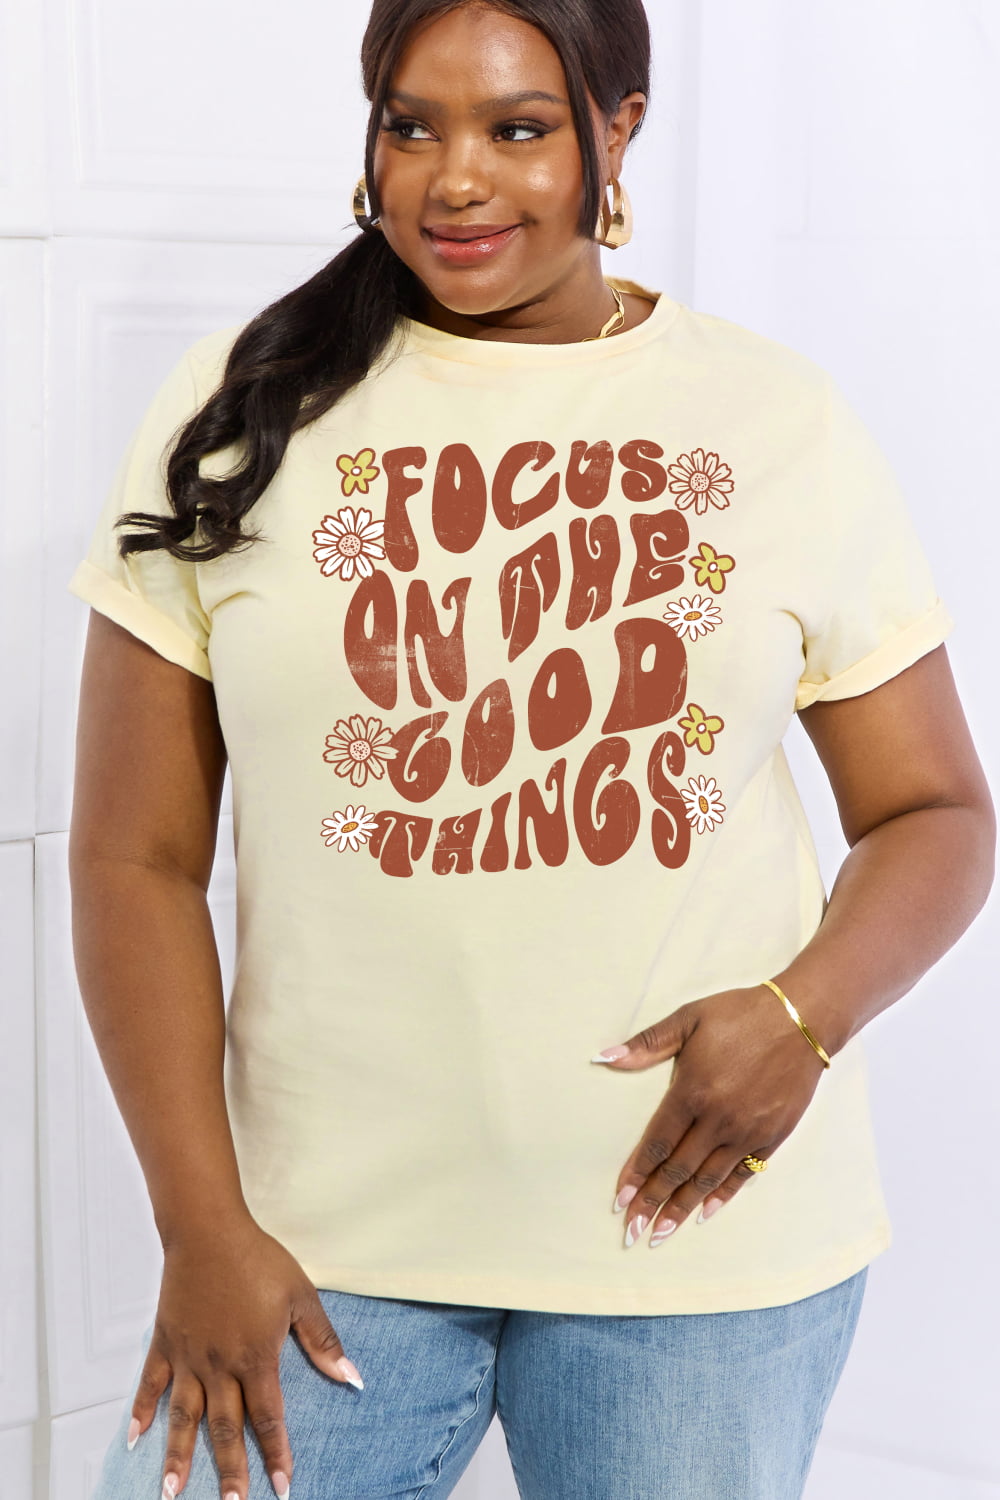 FOCUS ON THE GOOD THINGS Graphic Cotton Tee - T-Shirts - Shirts & Tops - 10 - 2024